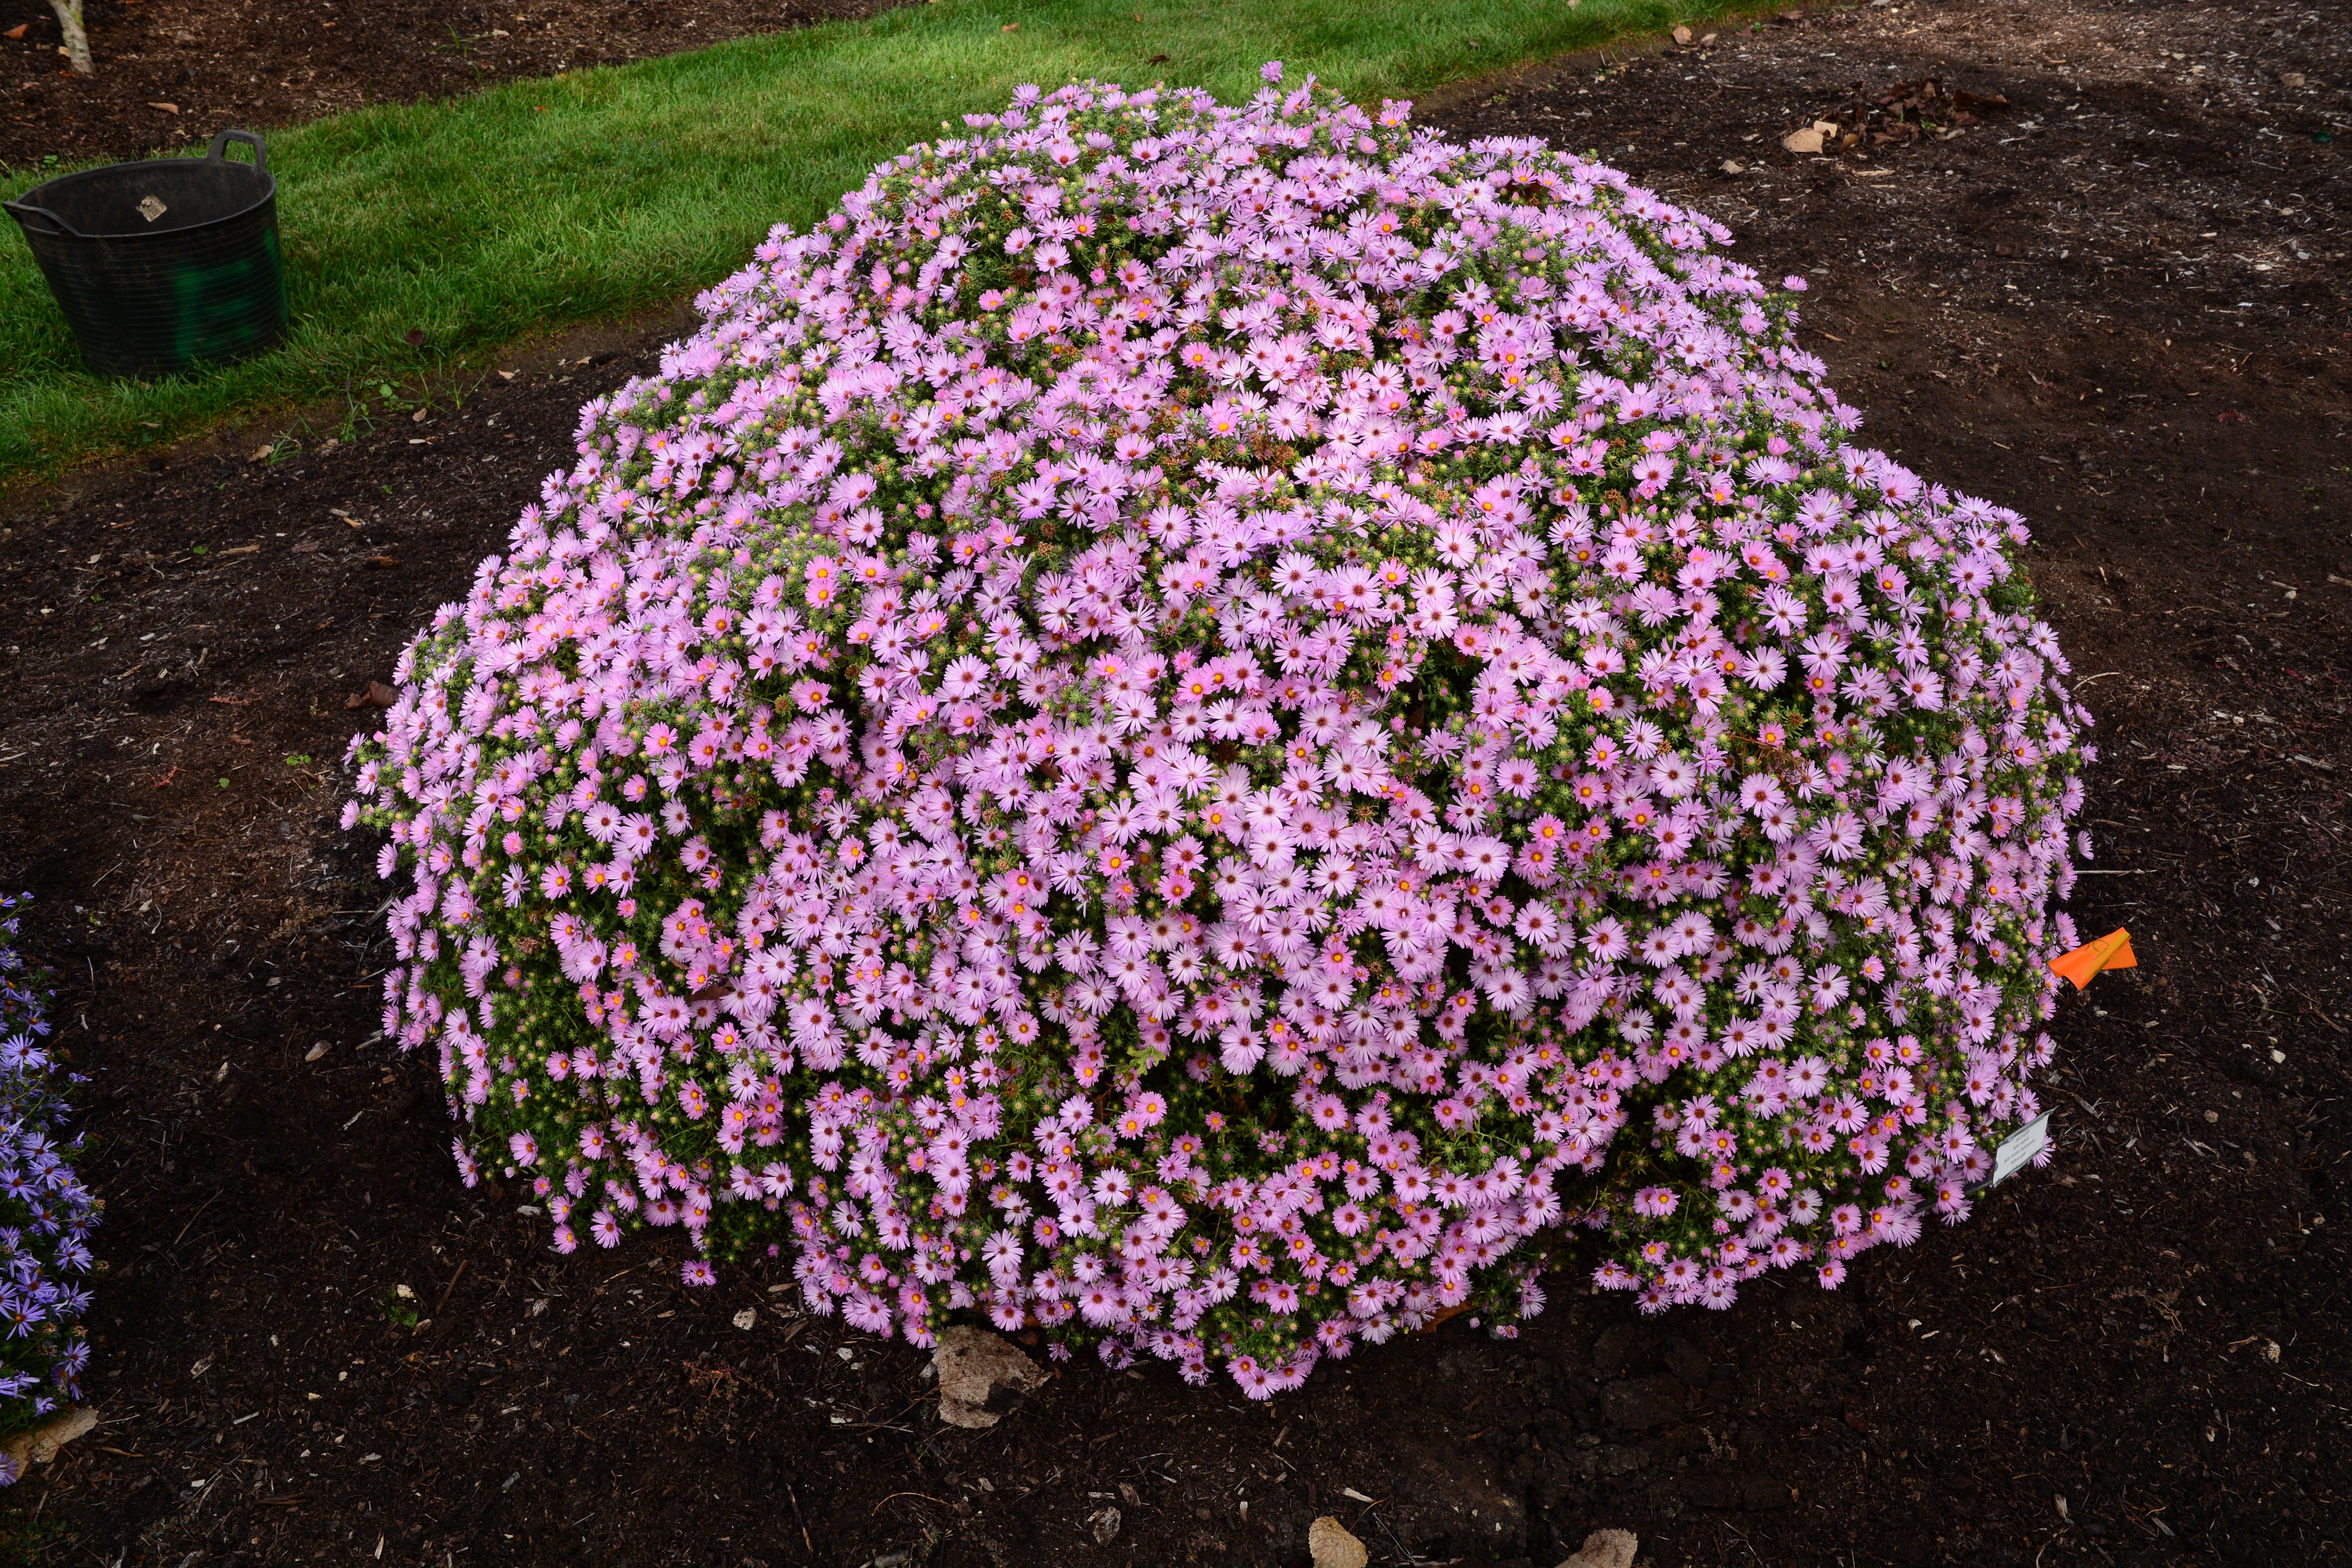 images/plants/aster/ast-billowing-pink/ast-billowing-pink-0005.jpg